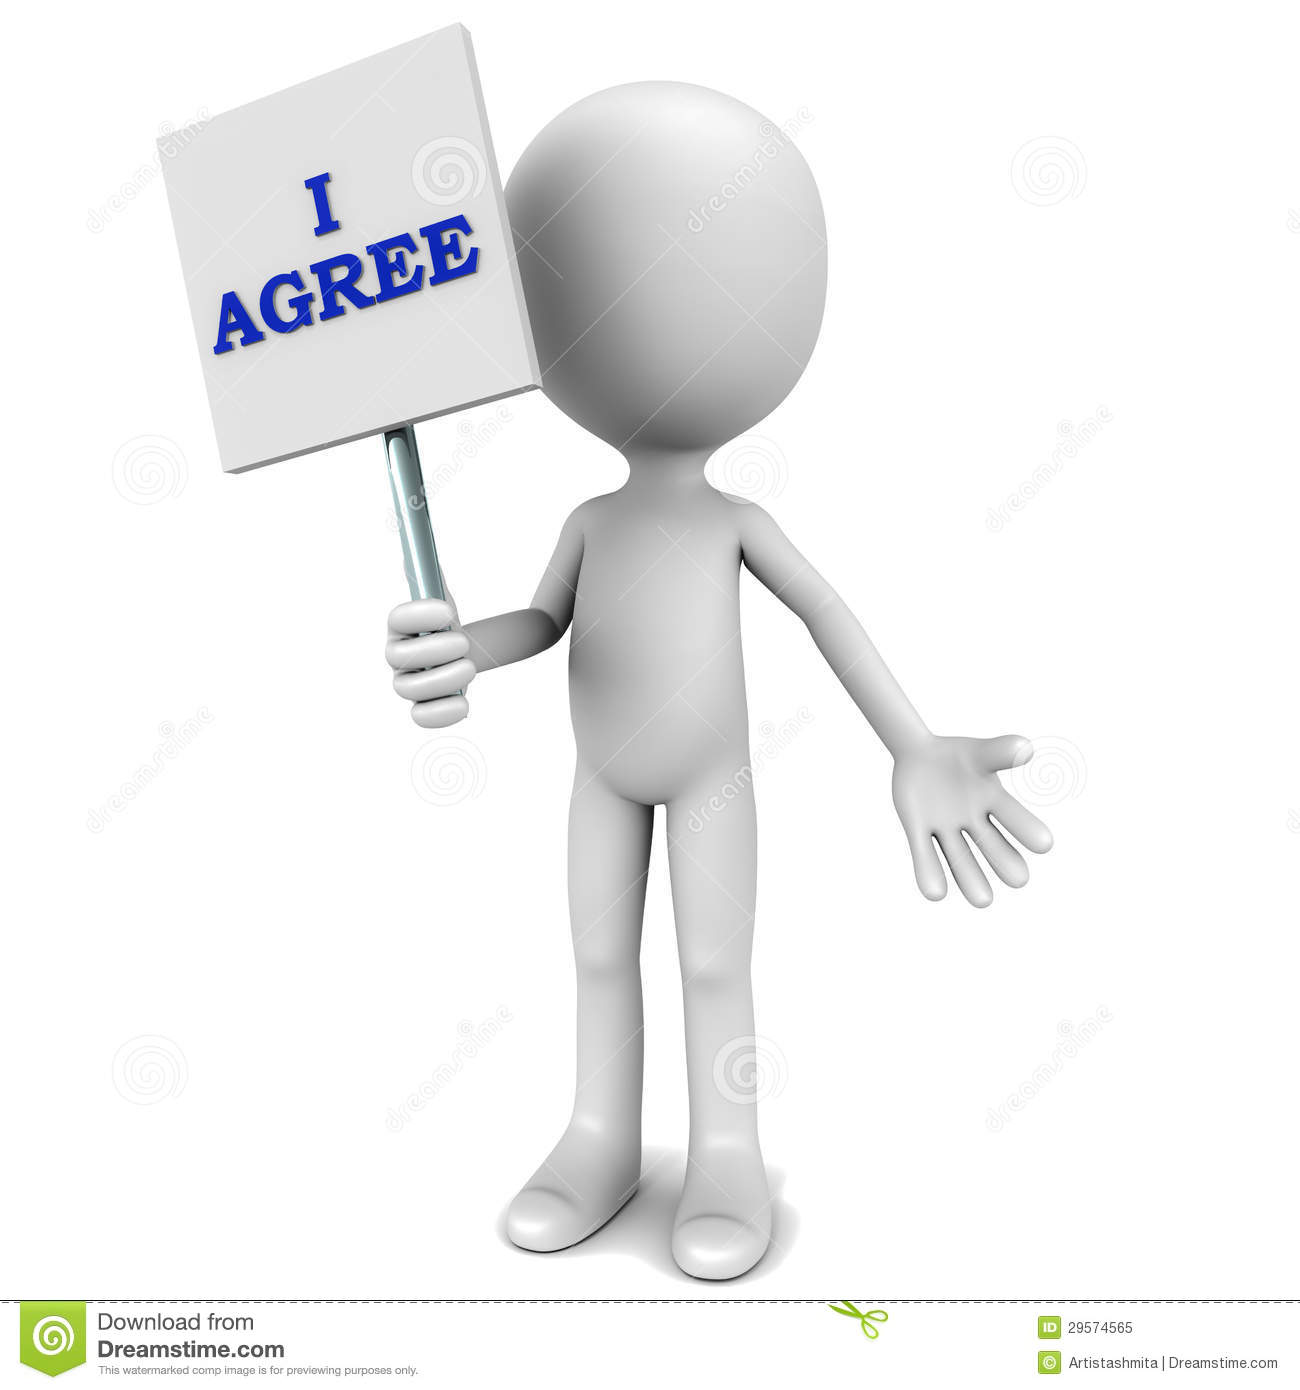 Agree Clipart I Agree Royalty Free Stock